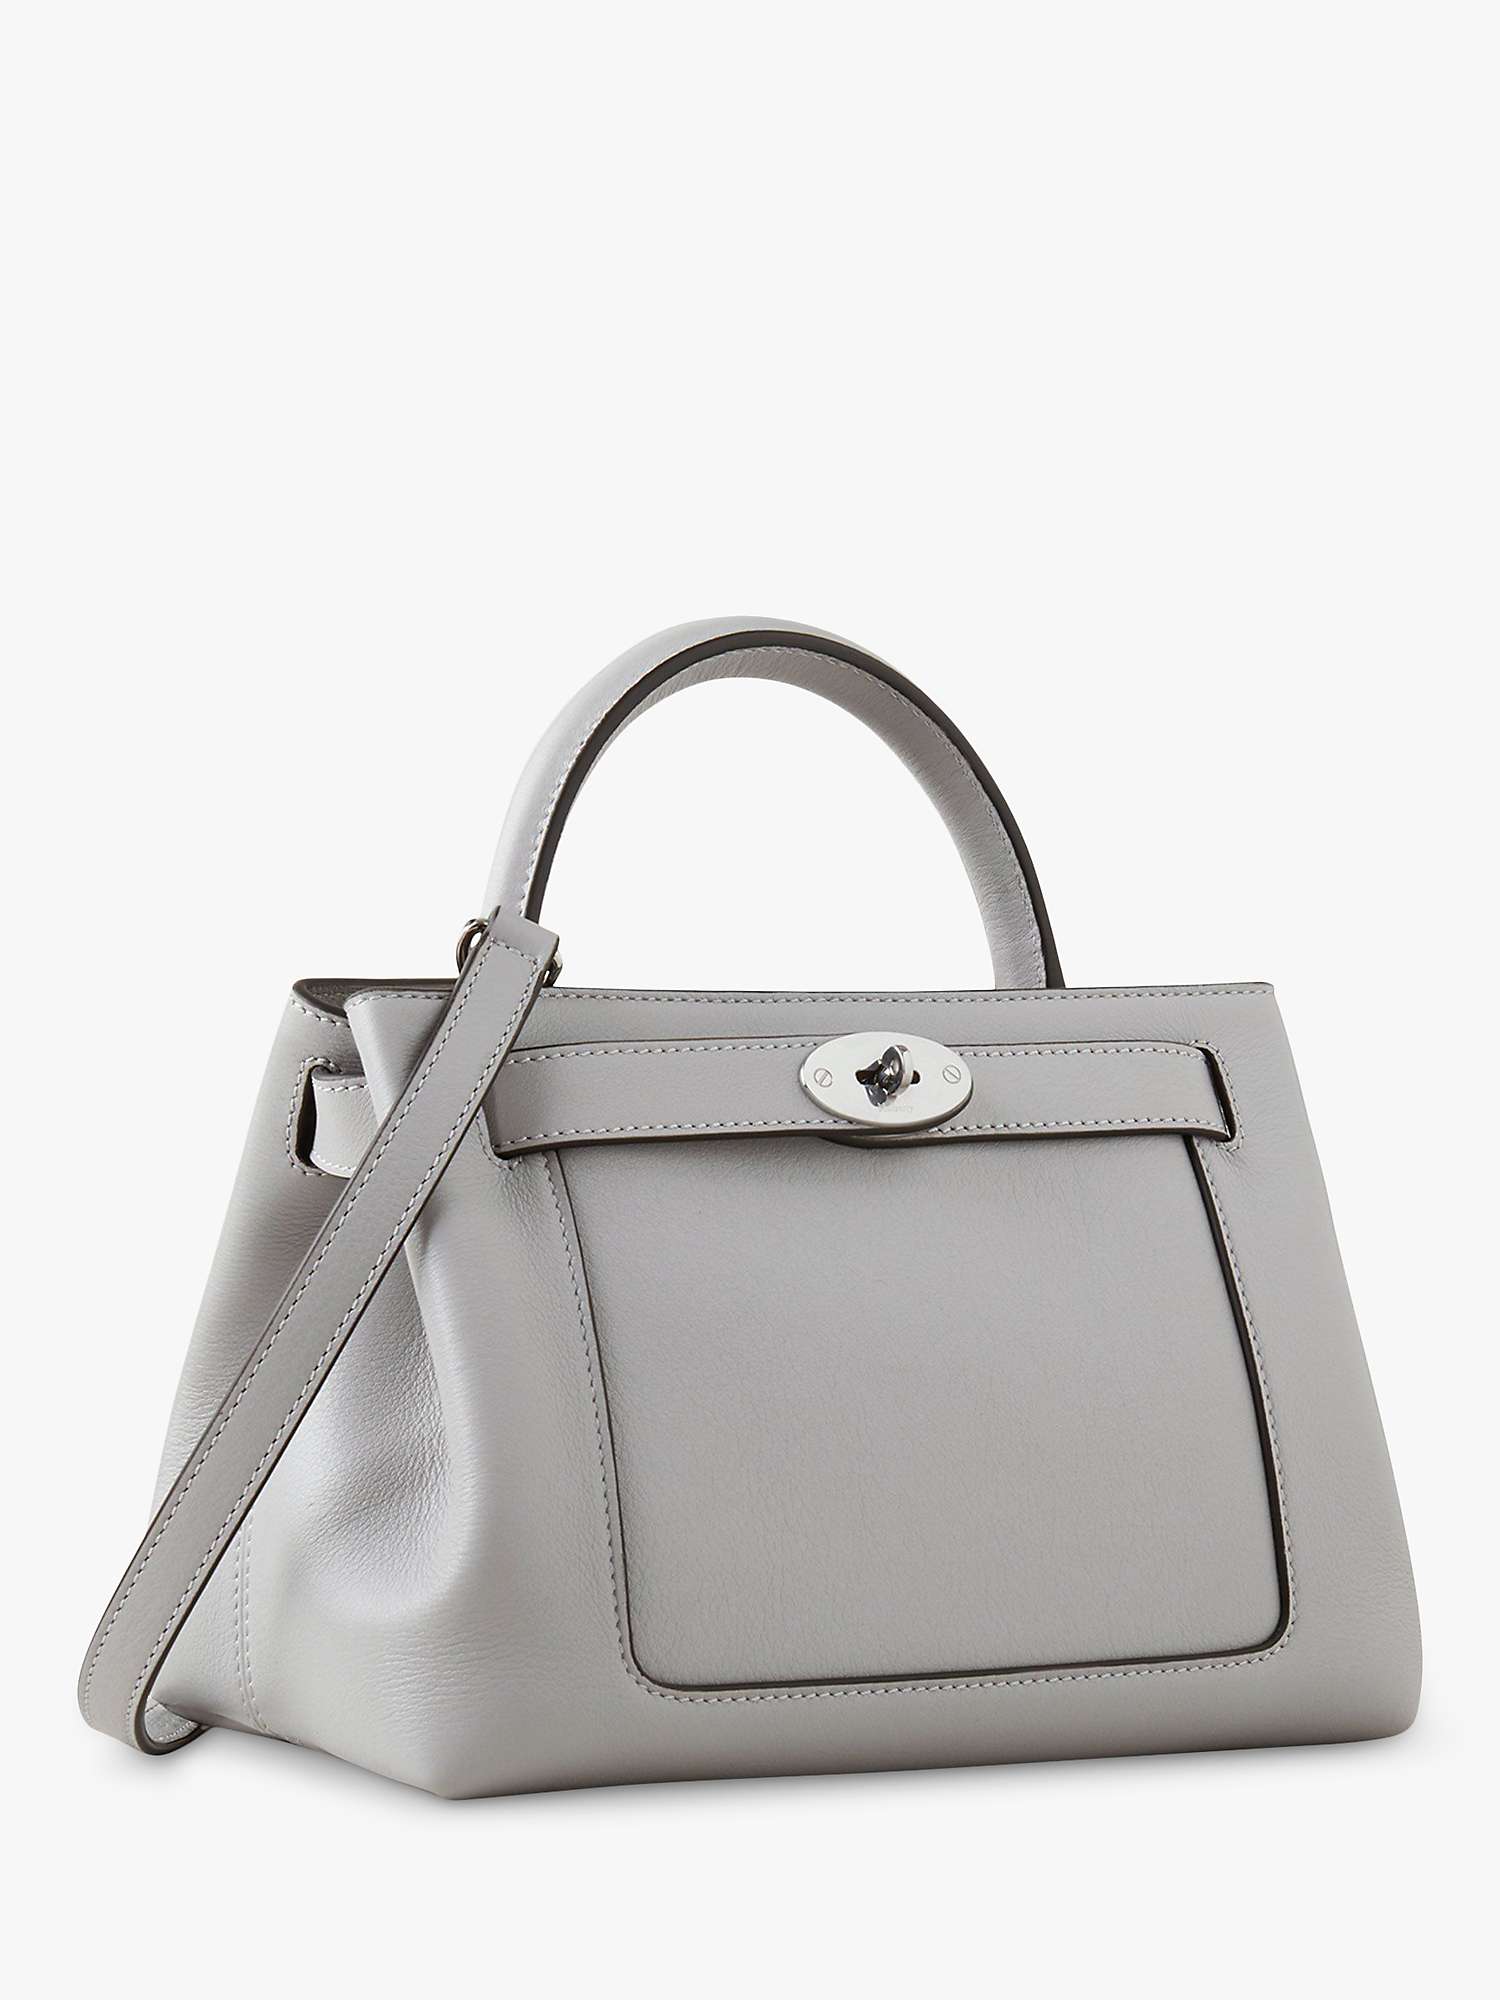 Buy Mulberry Small Islington Silky Calf Shoulder Bag Online at johnlewis.com